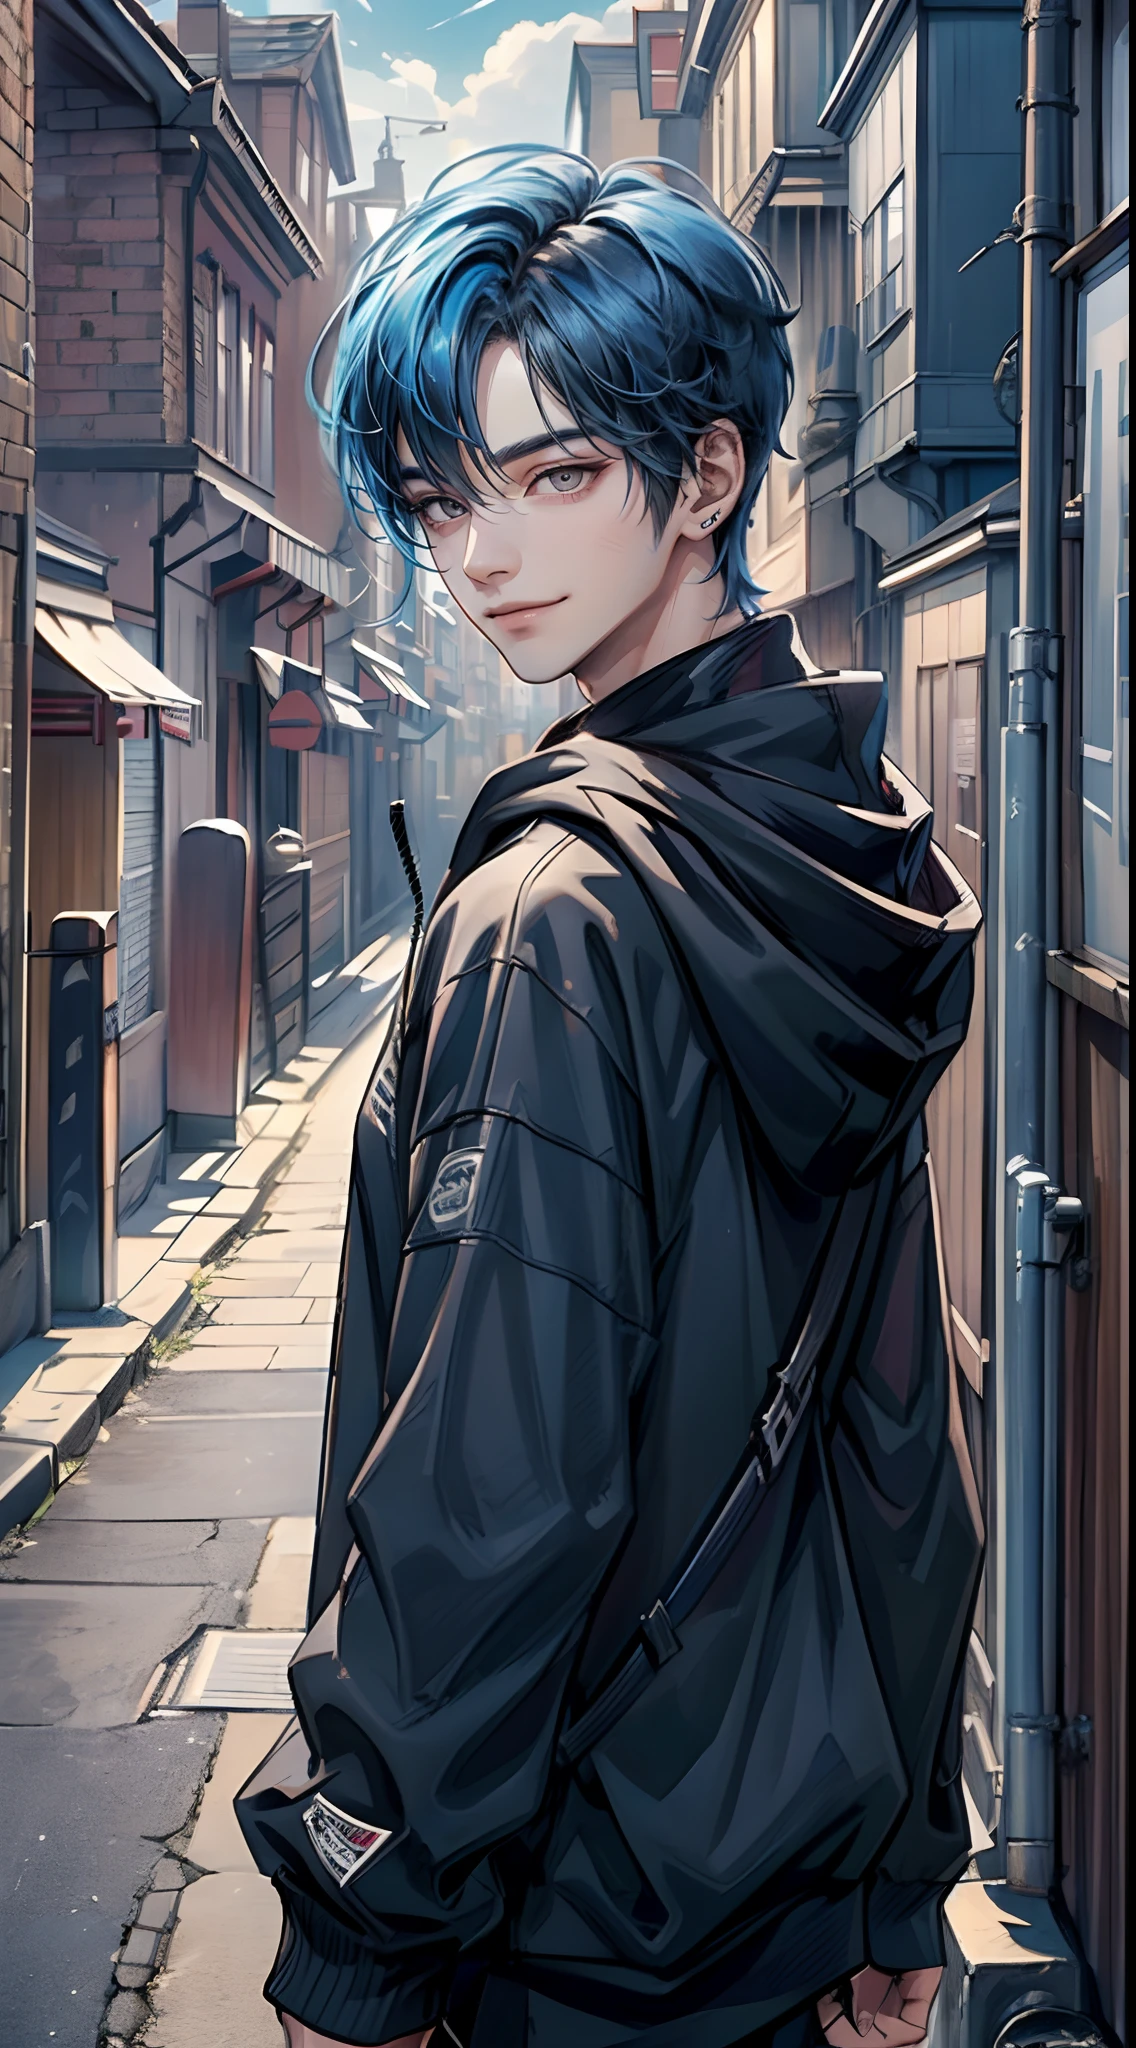 ((4K works))、​masterpiece、(top-quality)、One Beautiful Boy、Slim body、tall、((Attractive street style in black hoodie))、(Detailed beautiful eyes)、Fantastic British cities、Back alley in the daytime、((Strolling through a fantastic back alley))、((Daytime bright sky))、((Back alleys in the UK))、((Shot in a back alley in England))、((Short-haired bright blue hair))、((Smaller face))、((White eyes))、((American adult male))、((Adult male 26 years old))、((Cool Men))、((Like a celebrity))、((Smile showing teeth and smiling))、((Korean Makeup))、((elongated and sharp eyes))、((boyish))、((Upper body photography))、((Happy dating))、Professional Photos、((Shot alone))、((Shot diagonally from the side))、((Shot in close proximity to him))、((He is walking next to the viewer))、((Focus zoom in))